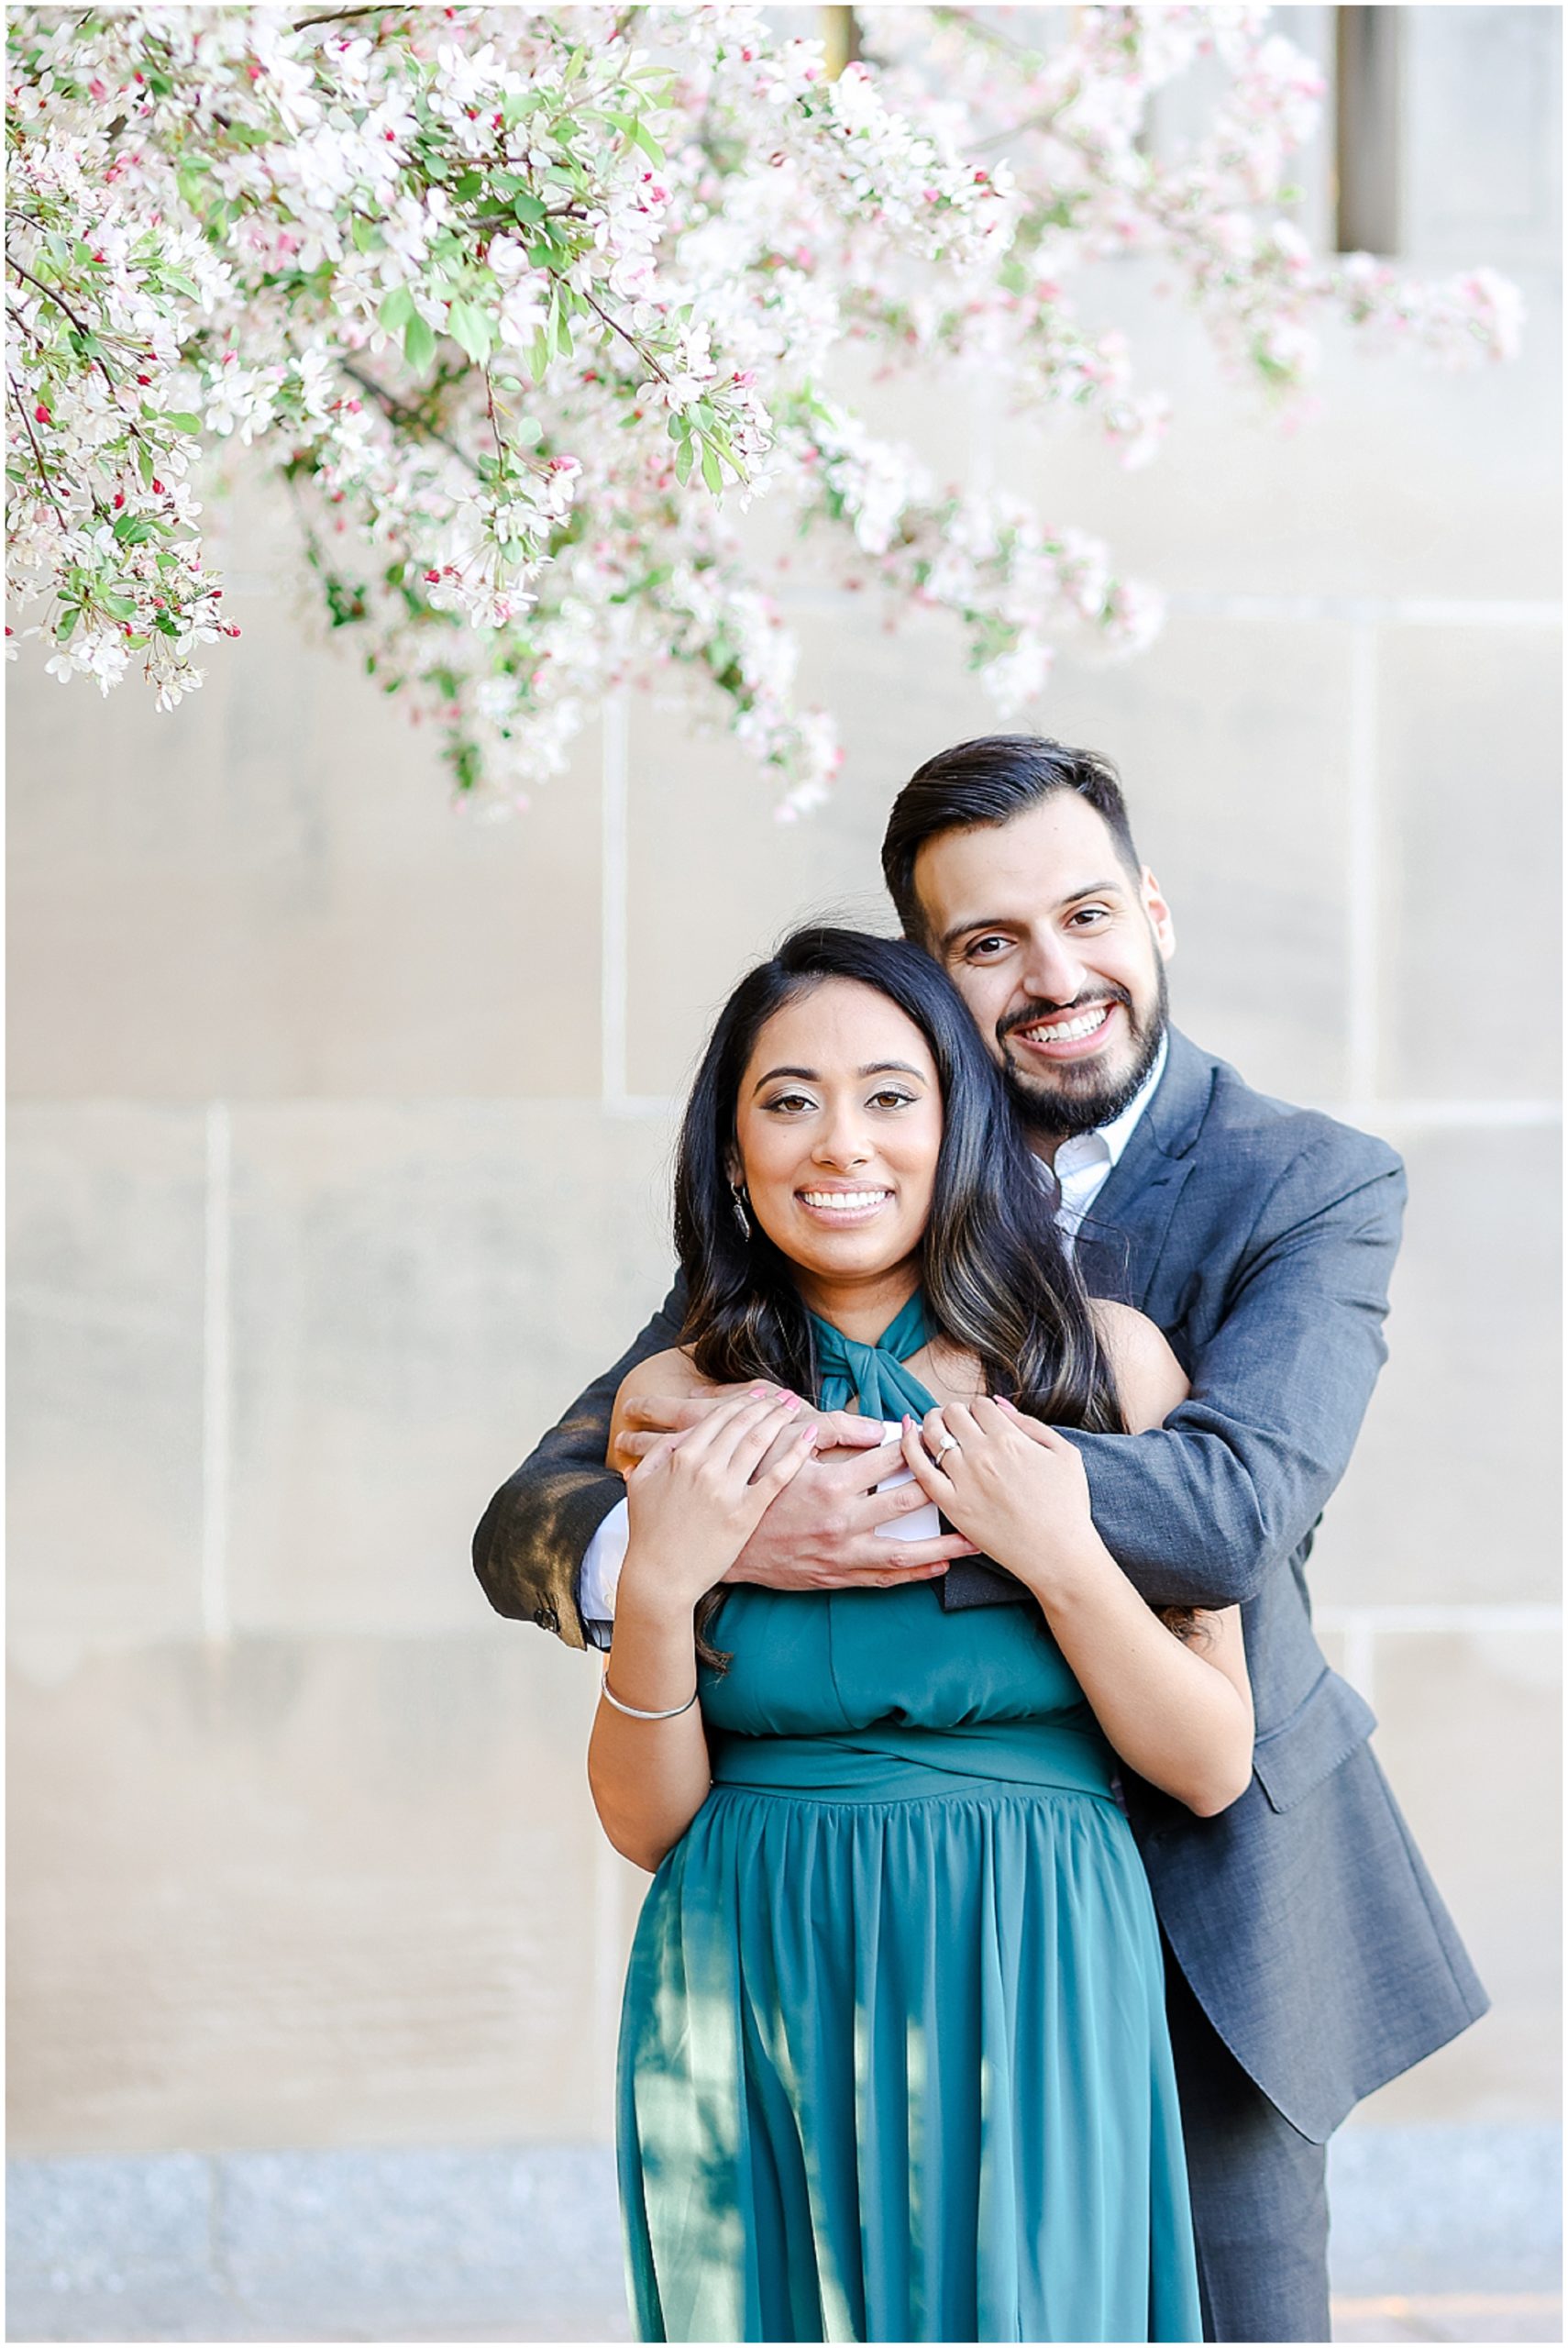 Spring Engagement Session in Kansas City - What to wear for portraits - where to take your engagement photos - mariam saifan photography - kaman and byrant indian engagement photos  - stl and florida wedding photographer for indian weddings